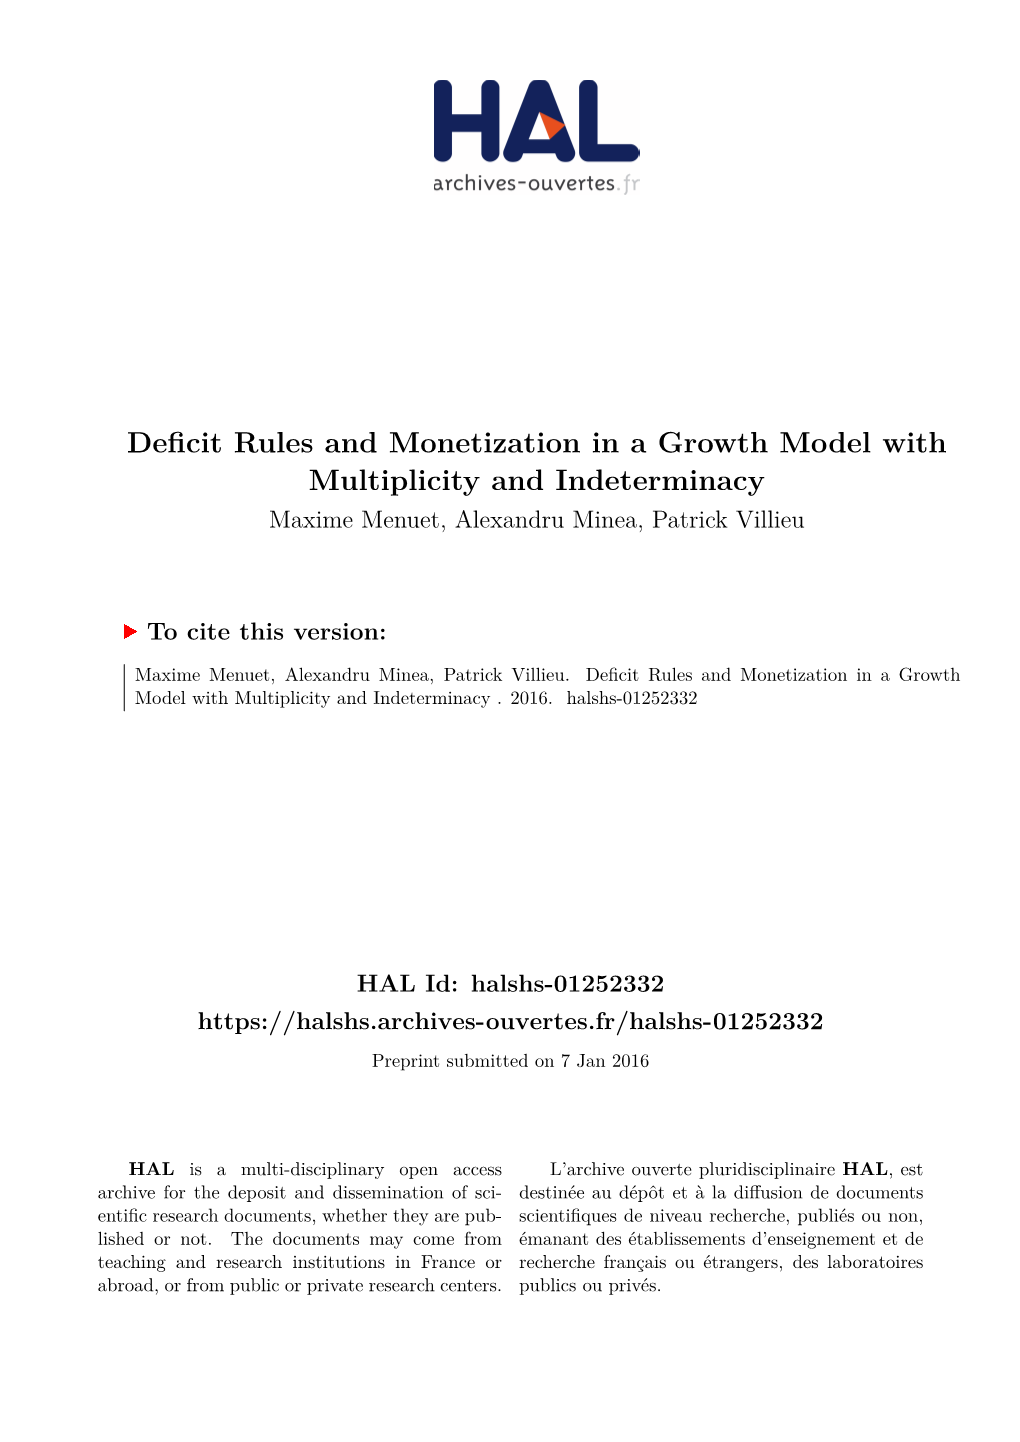 Deficit Rules and Monetization in a Growth Model with Multiplicity and Indeterminacy Maxime Menuet, Alexandru Minea, Patrick Villieu